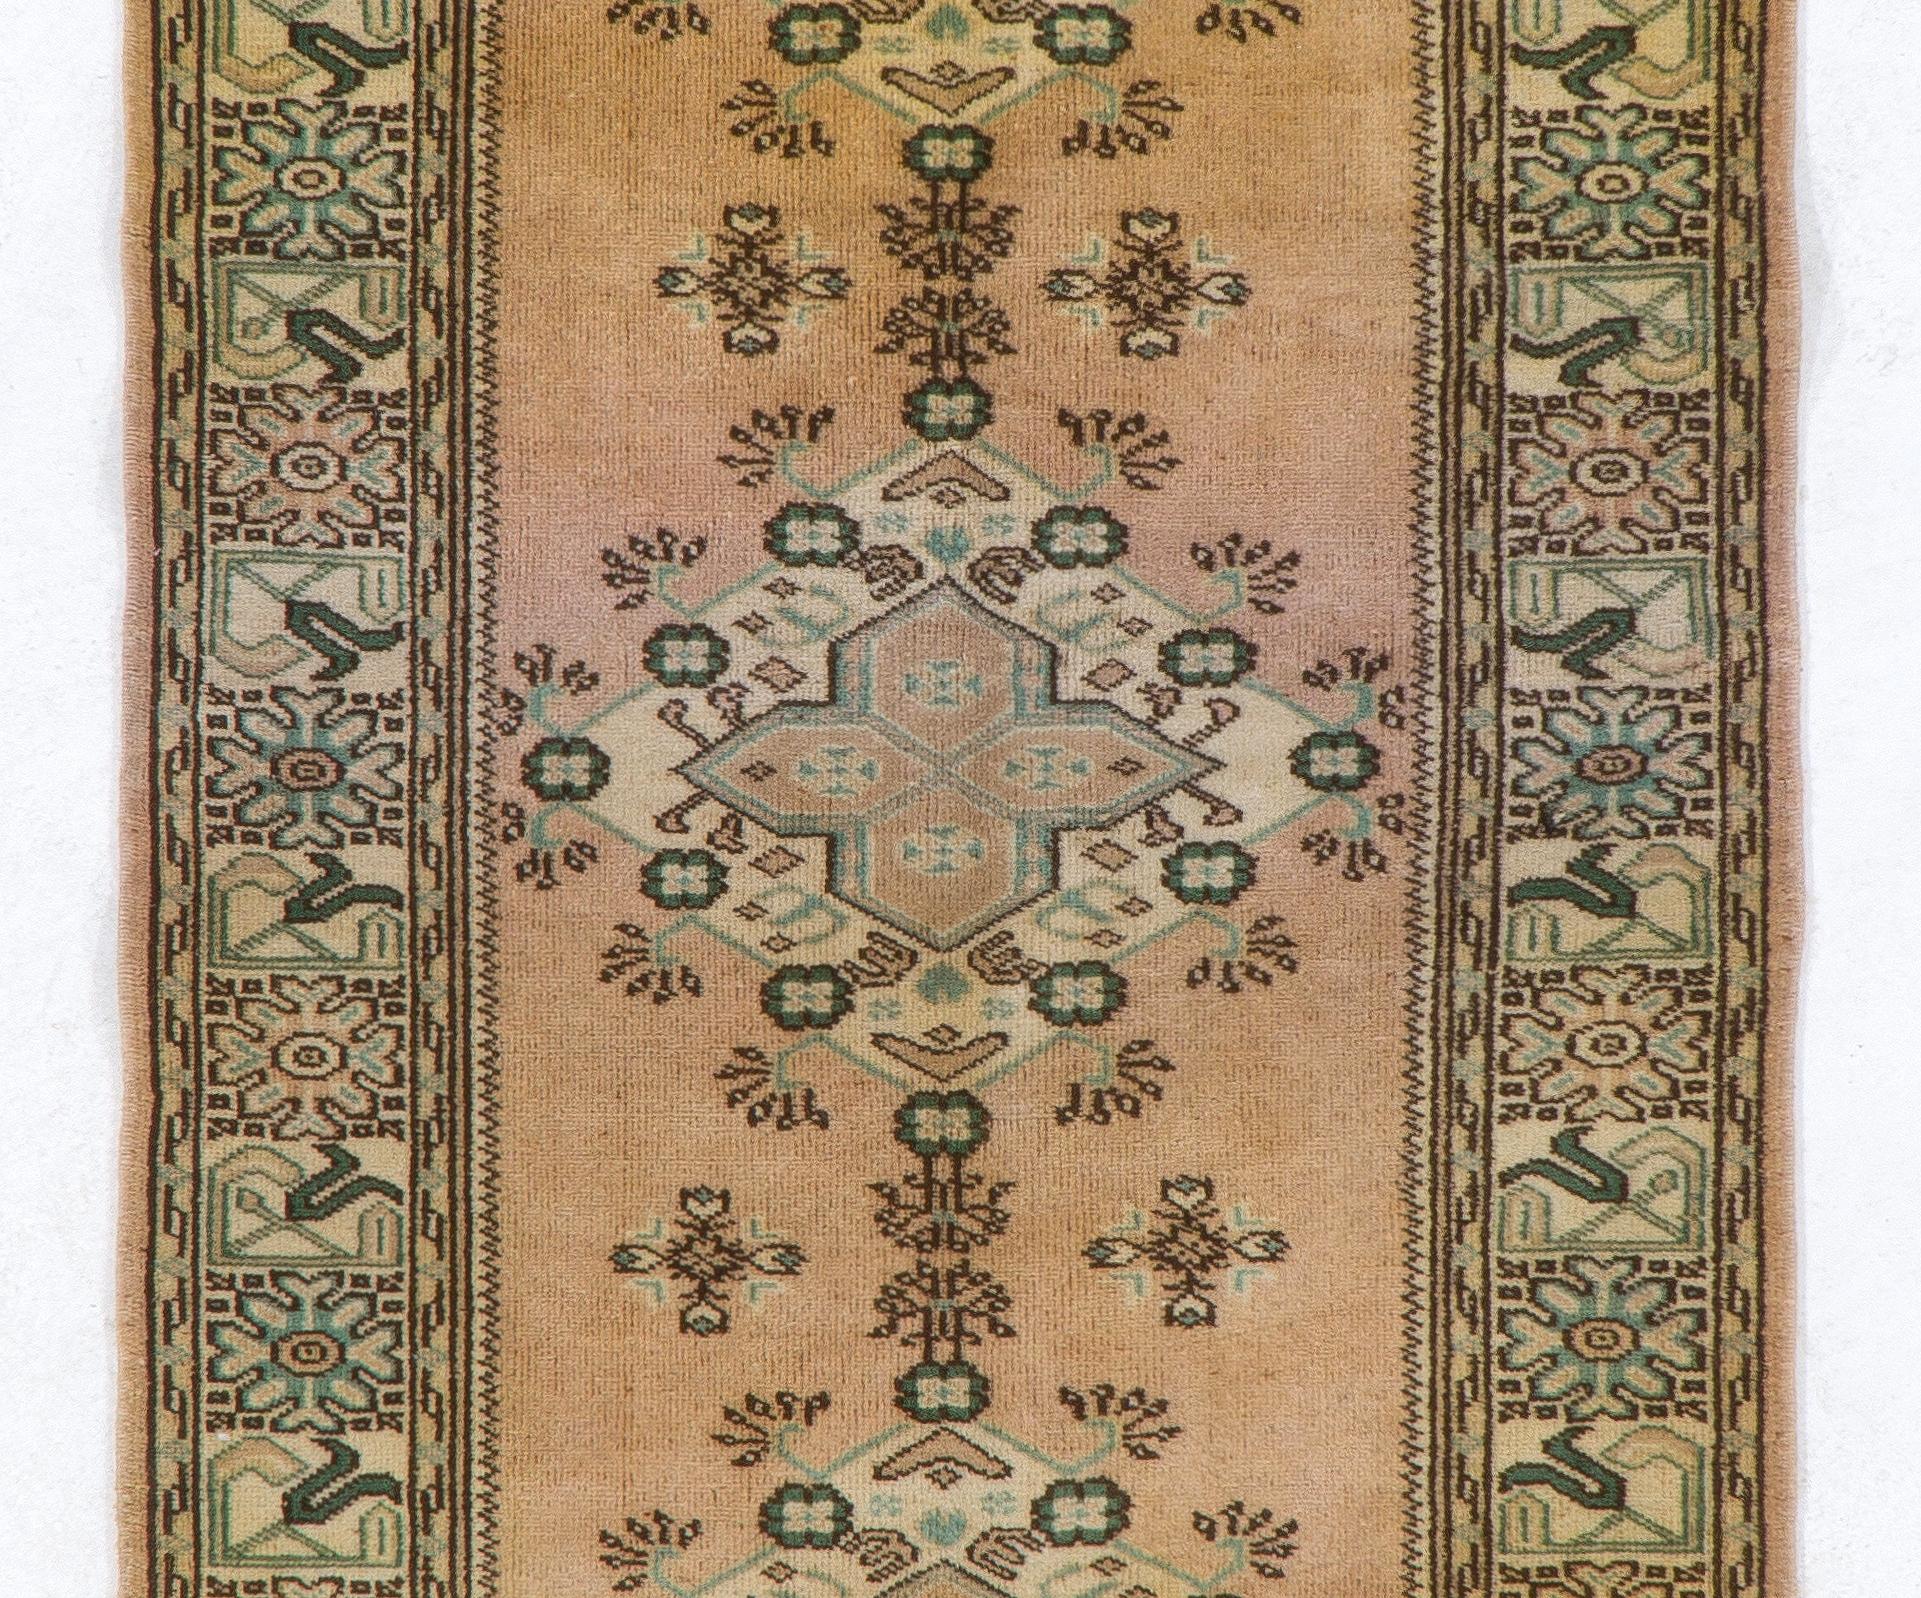 A vintage Turkish runner rug with a linked medallions design against a faded salmon background and a border in green, blue and ivory decorated with medallion like floral heads and tulip motifs.

The rug was hand-knotted in the 1960s with wool pile